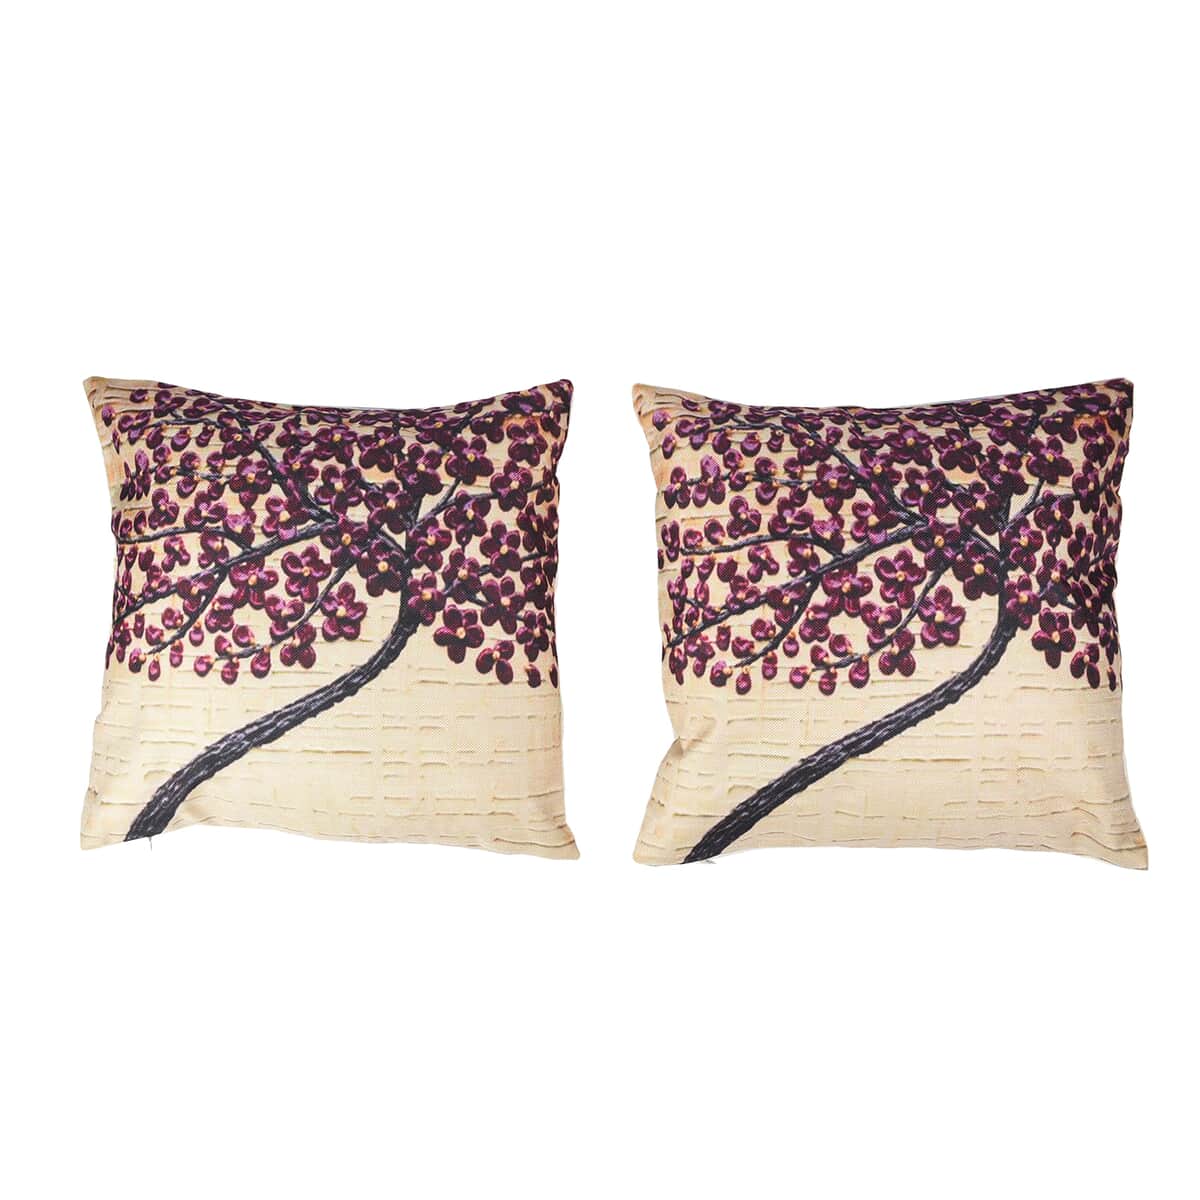 Homesmart Beige & Burgundy Floral Tree Pattern 100% Polyester Cushion Cover Set of 2, Wrinkle Resistant Ultra Soft Cushion Cover Set with Zipper Closure image number 0